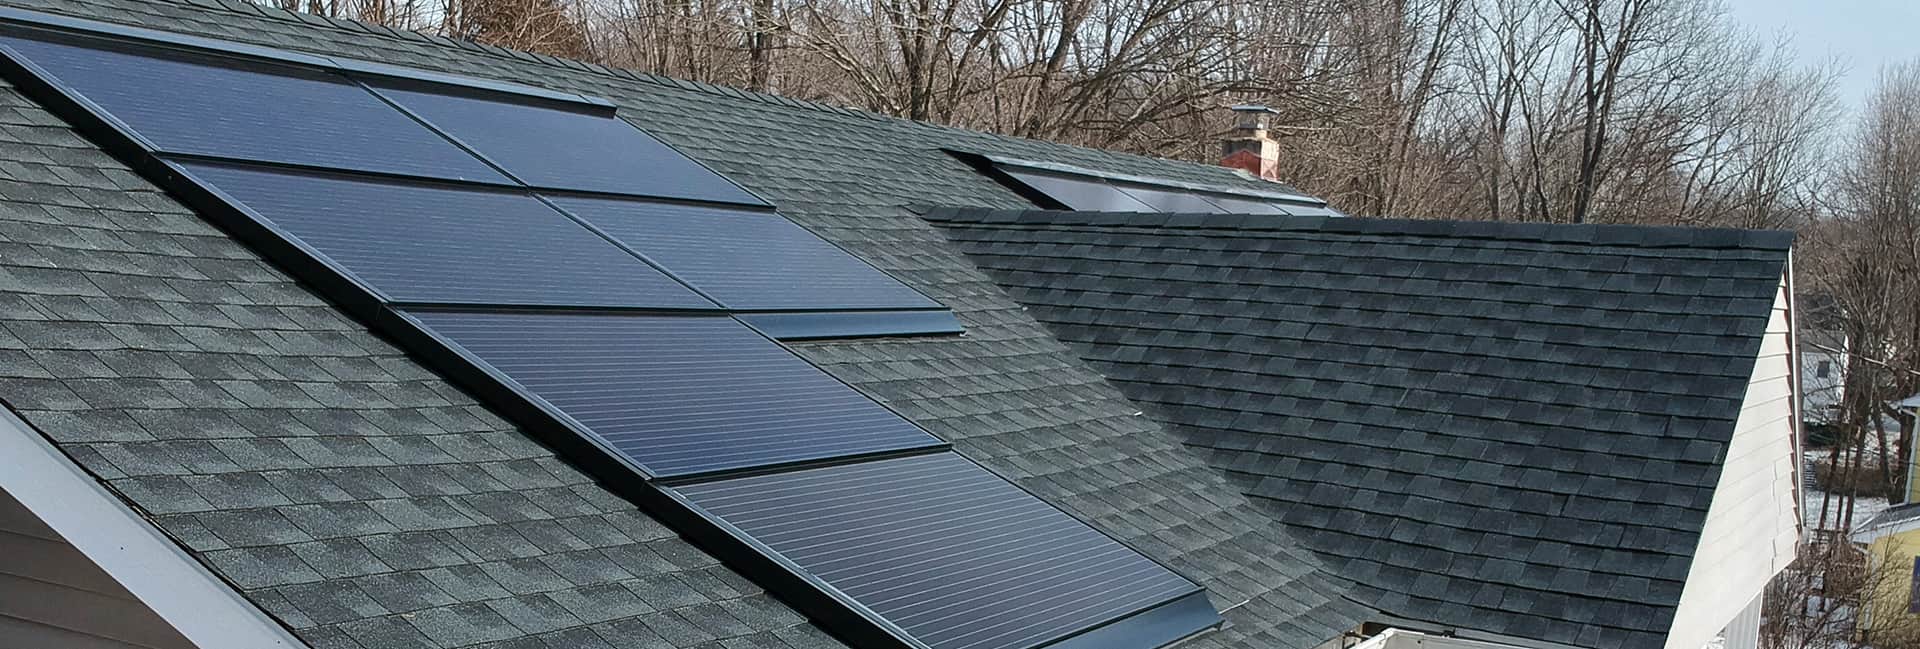 Solar Roofing Installation Repair Westchestser NY